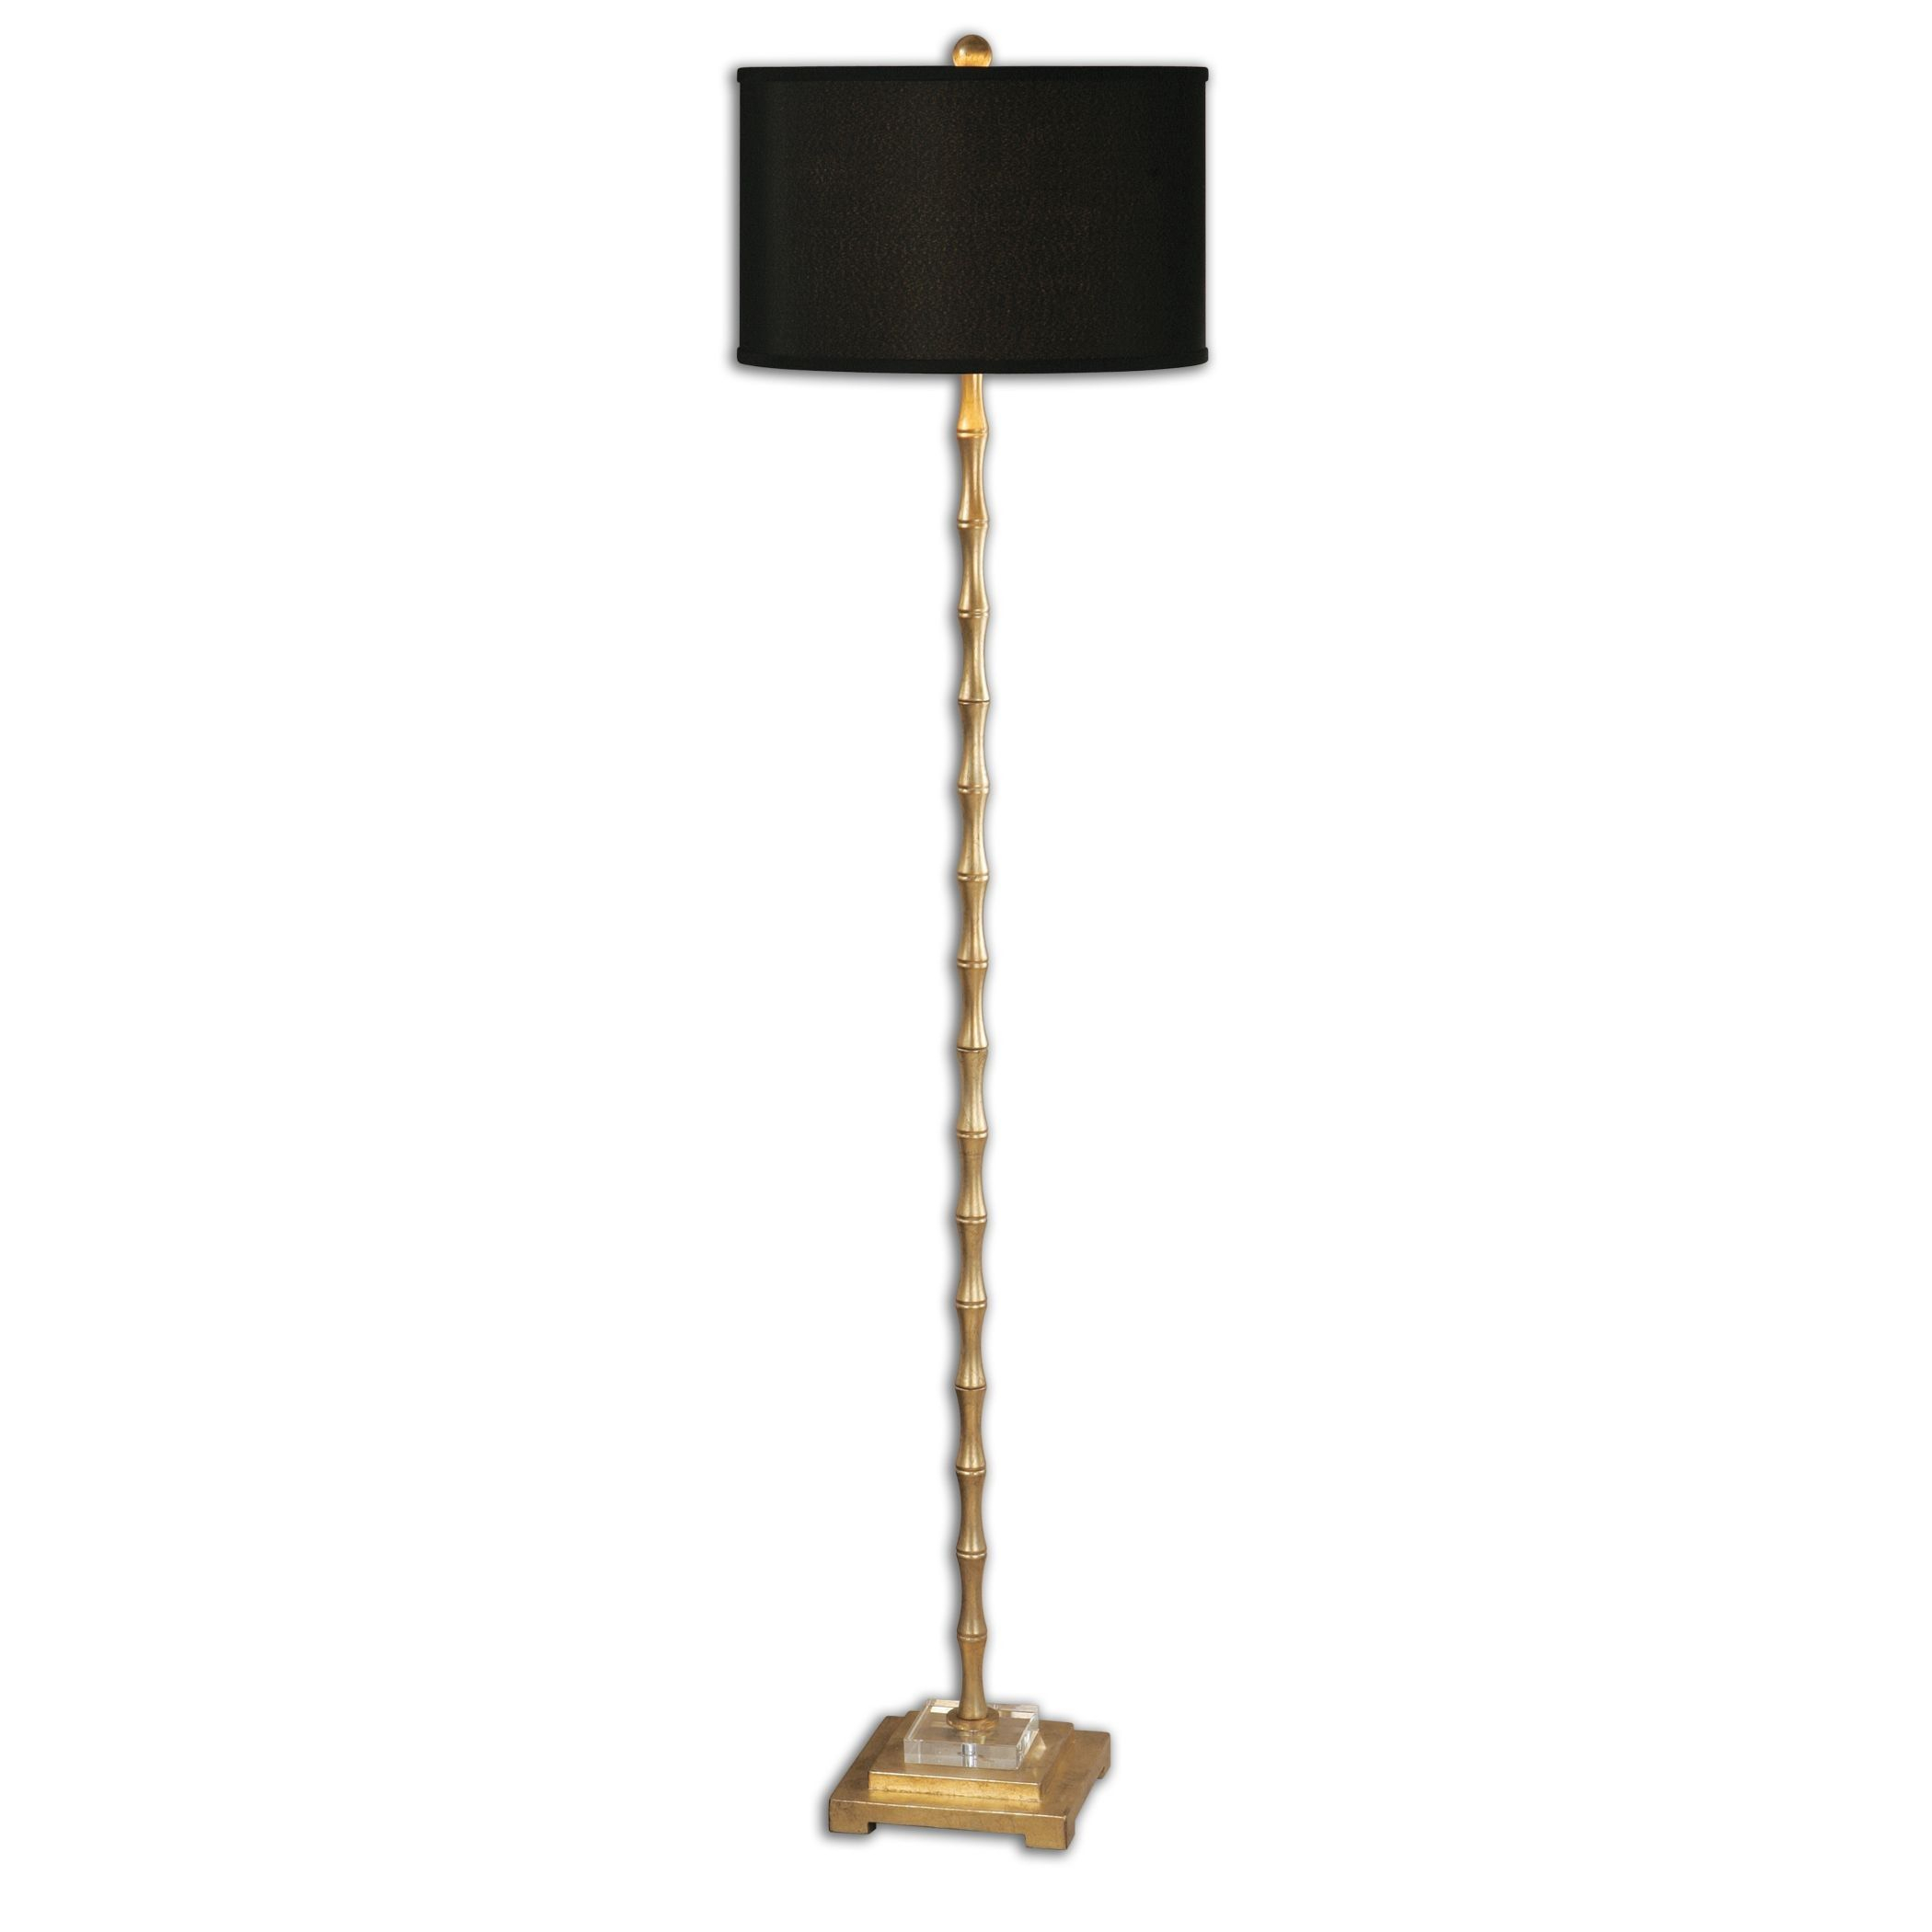 Lulu Georgia Golden Bamboo Floor Lamp Black And Gold for dimensions 2100 X 2100